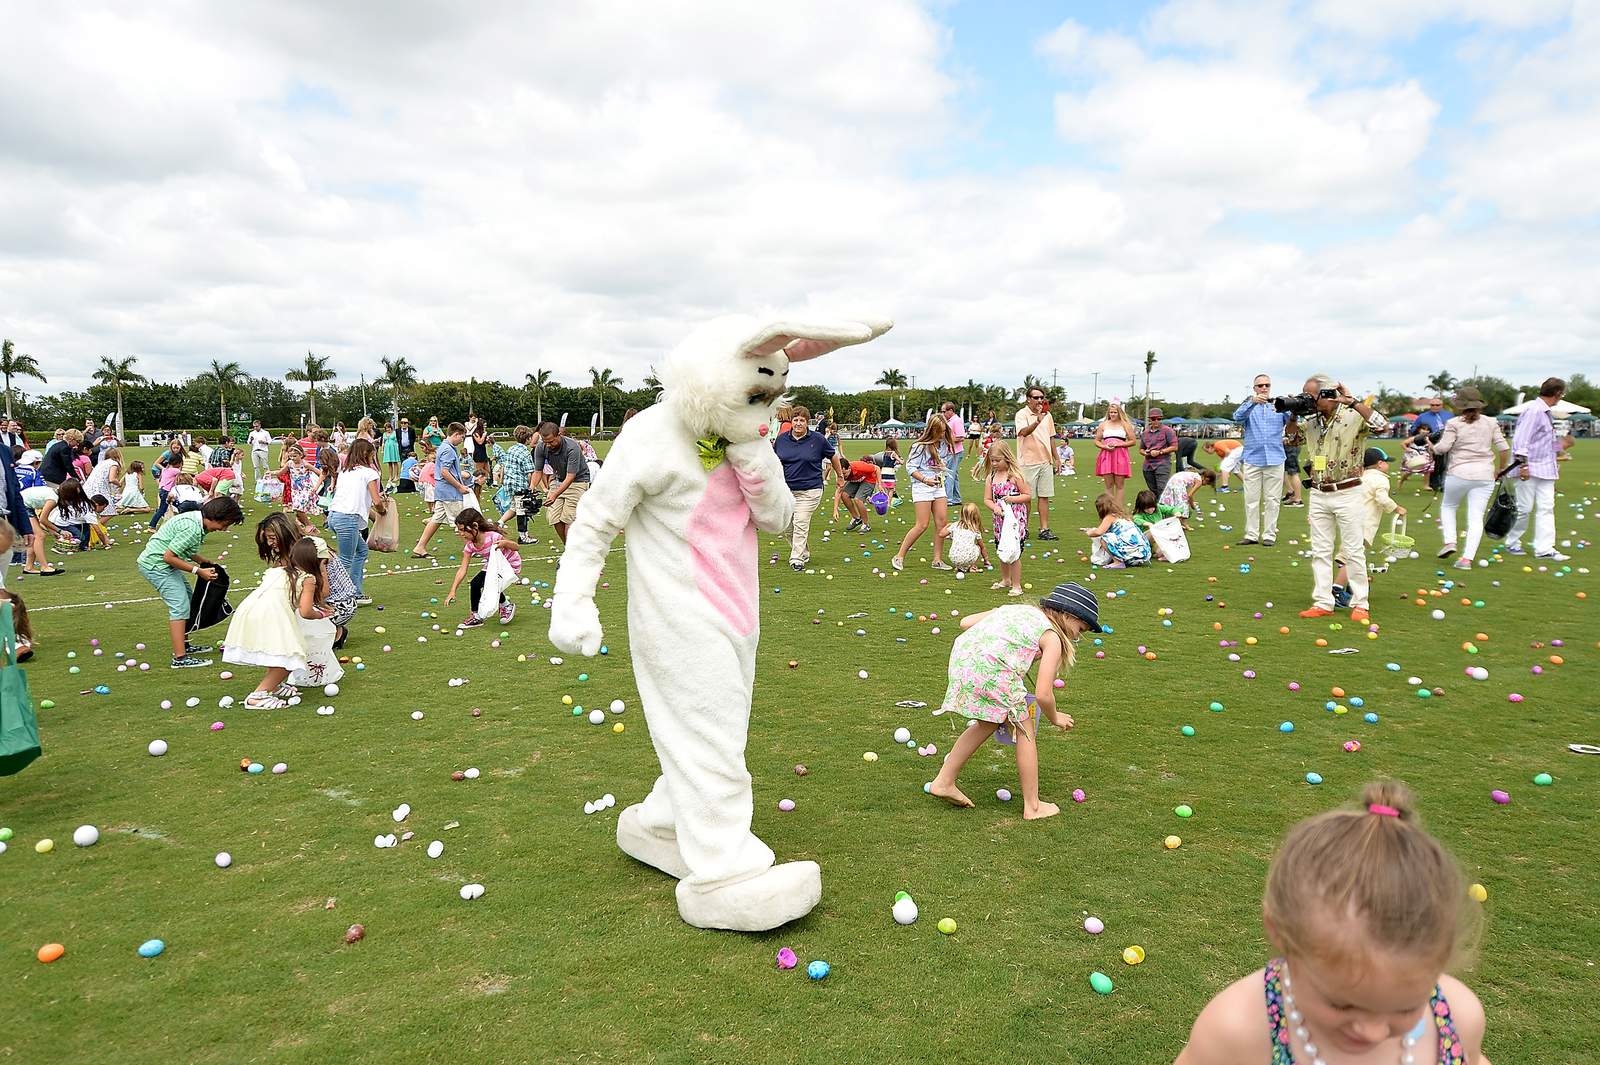 Hunting for an idea? Here’s a list of Easter activities in the Jacksonville area